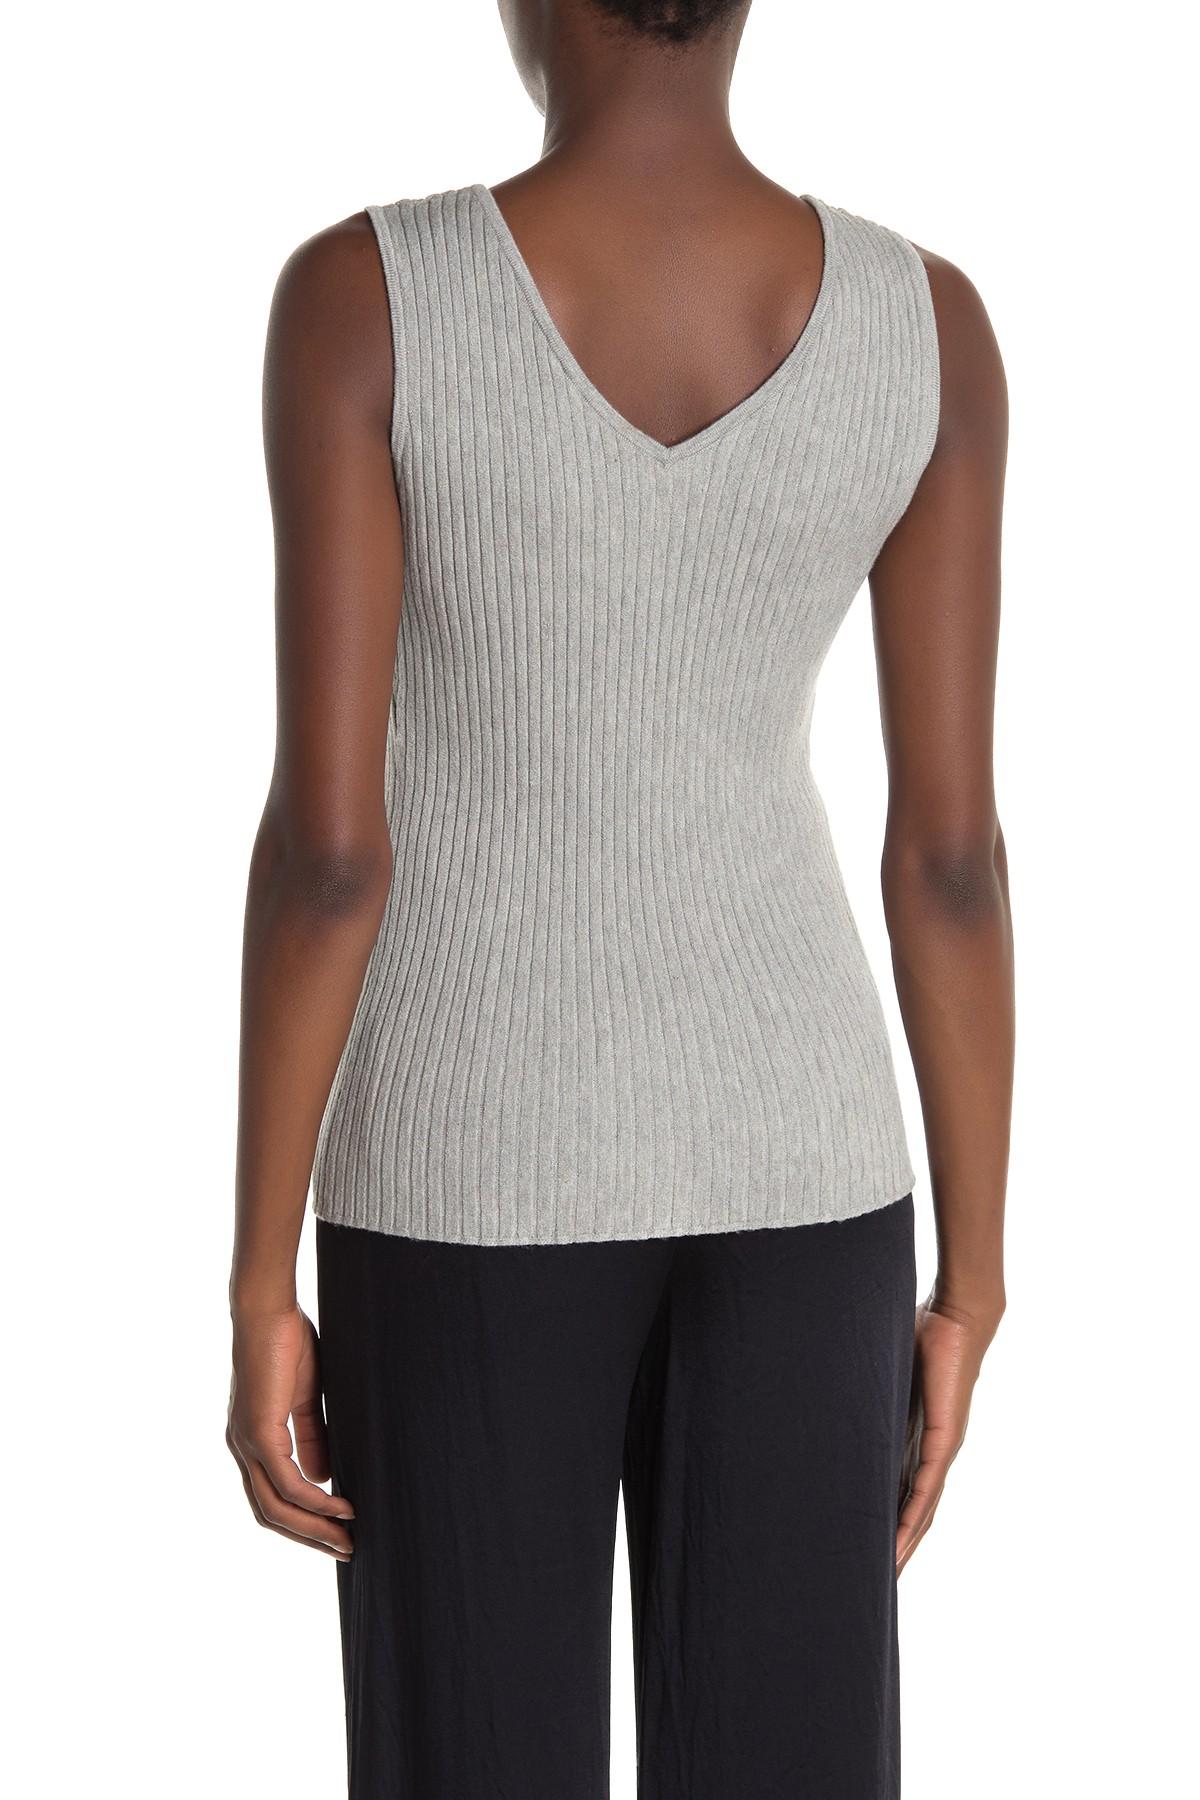 Max Studio Synthetic V-neck Sweater Tank Top in Heather Soft Grey (Gray ...